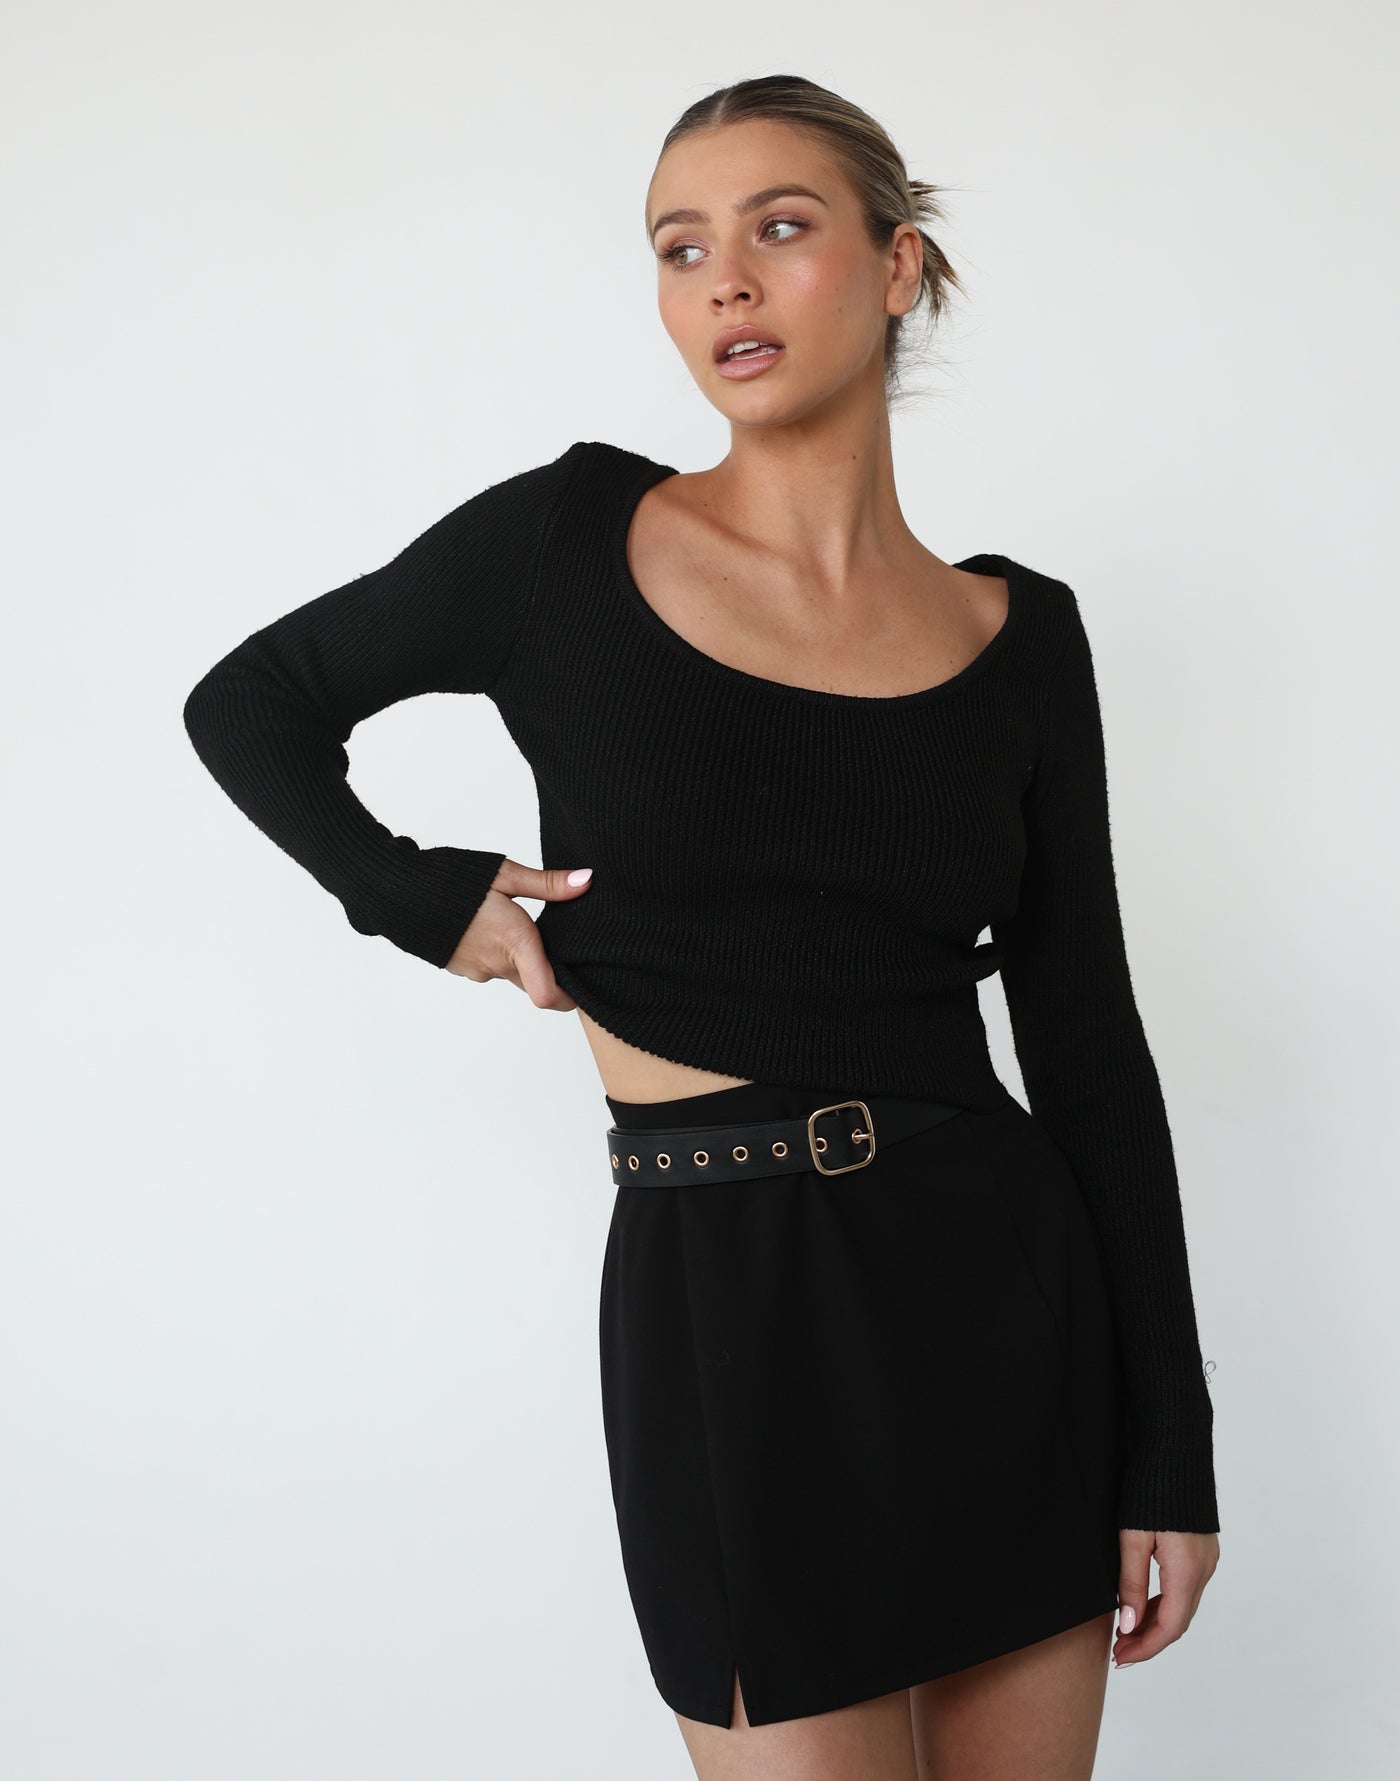 Ianne Long Sleeve Top (Black) - Basic Scooped Neck Top - Women's Tops - Charcoal Clothing